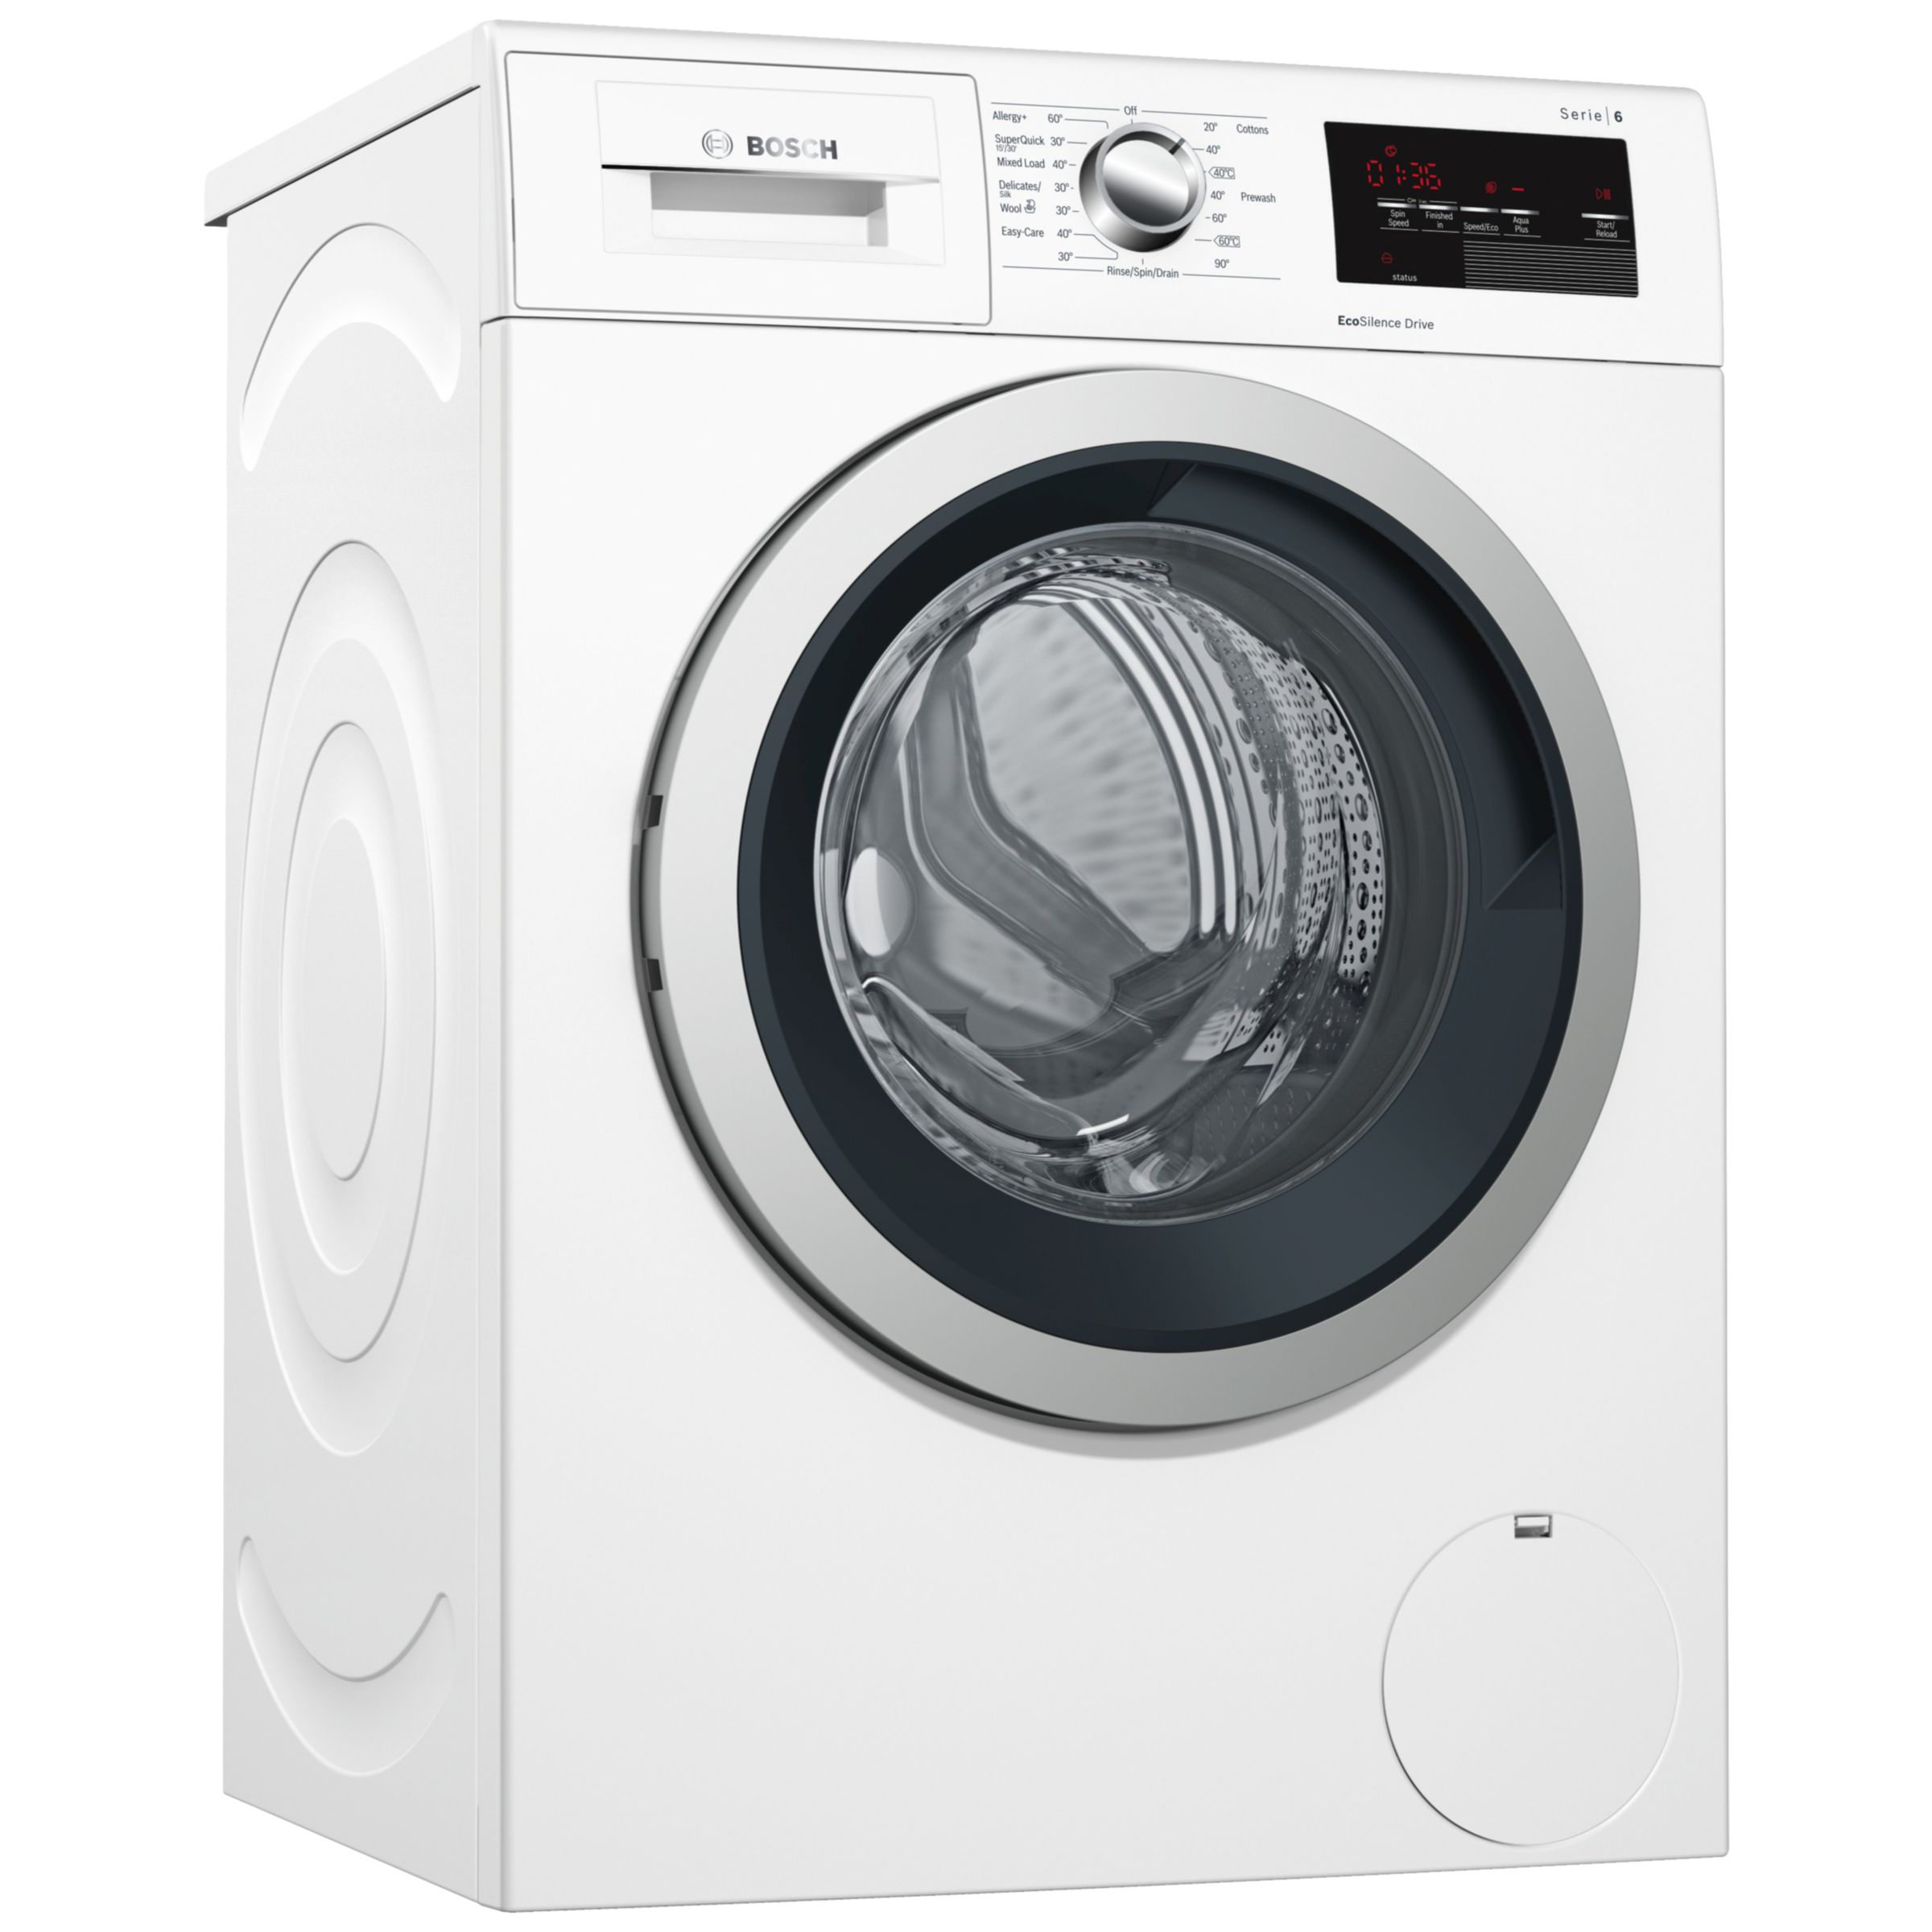 Bosch WAT283S0GB Freestanding Washing Machine, 8kg Load, A+++ Energy Rating, 1400rpm Spin, White